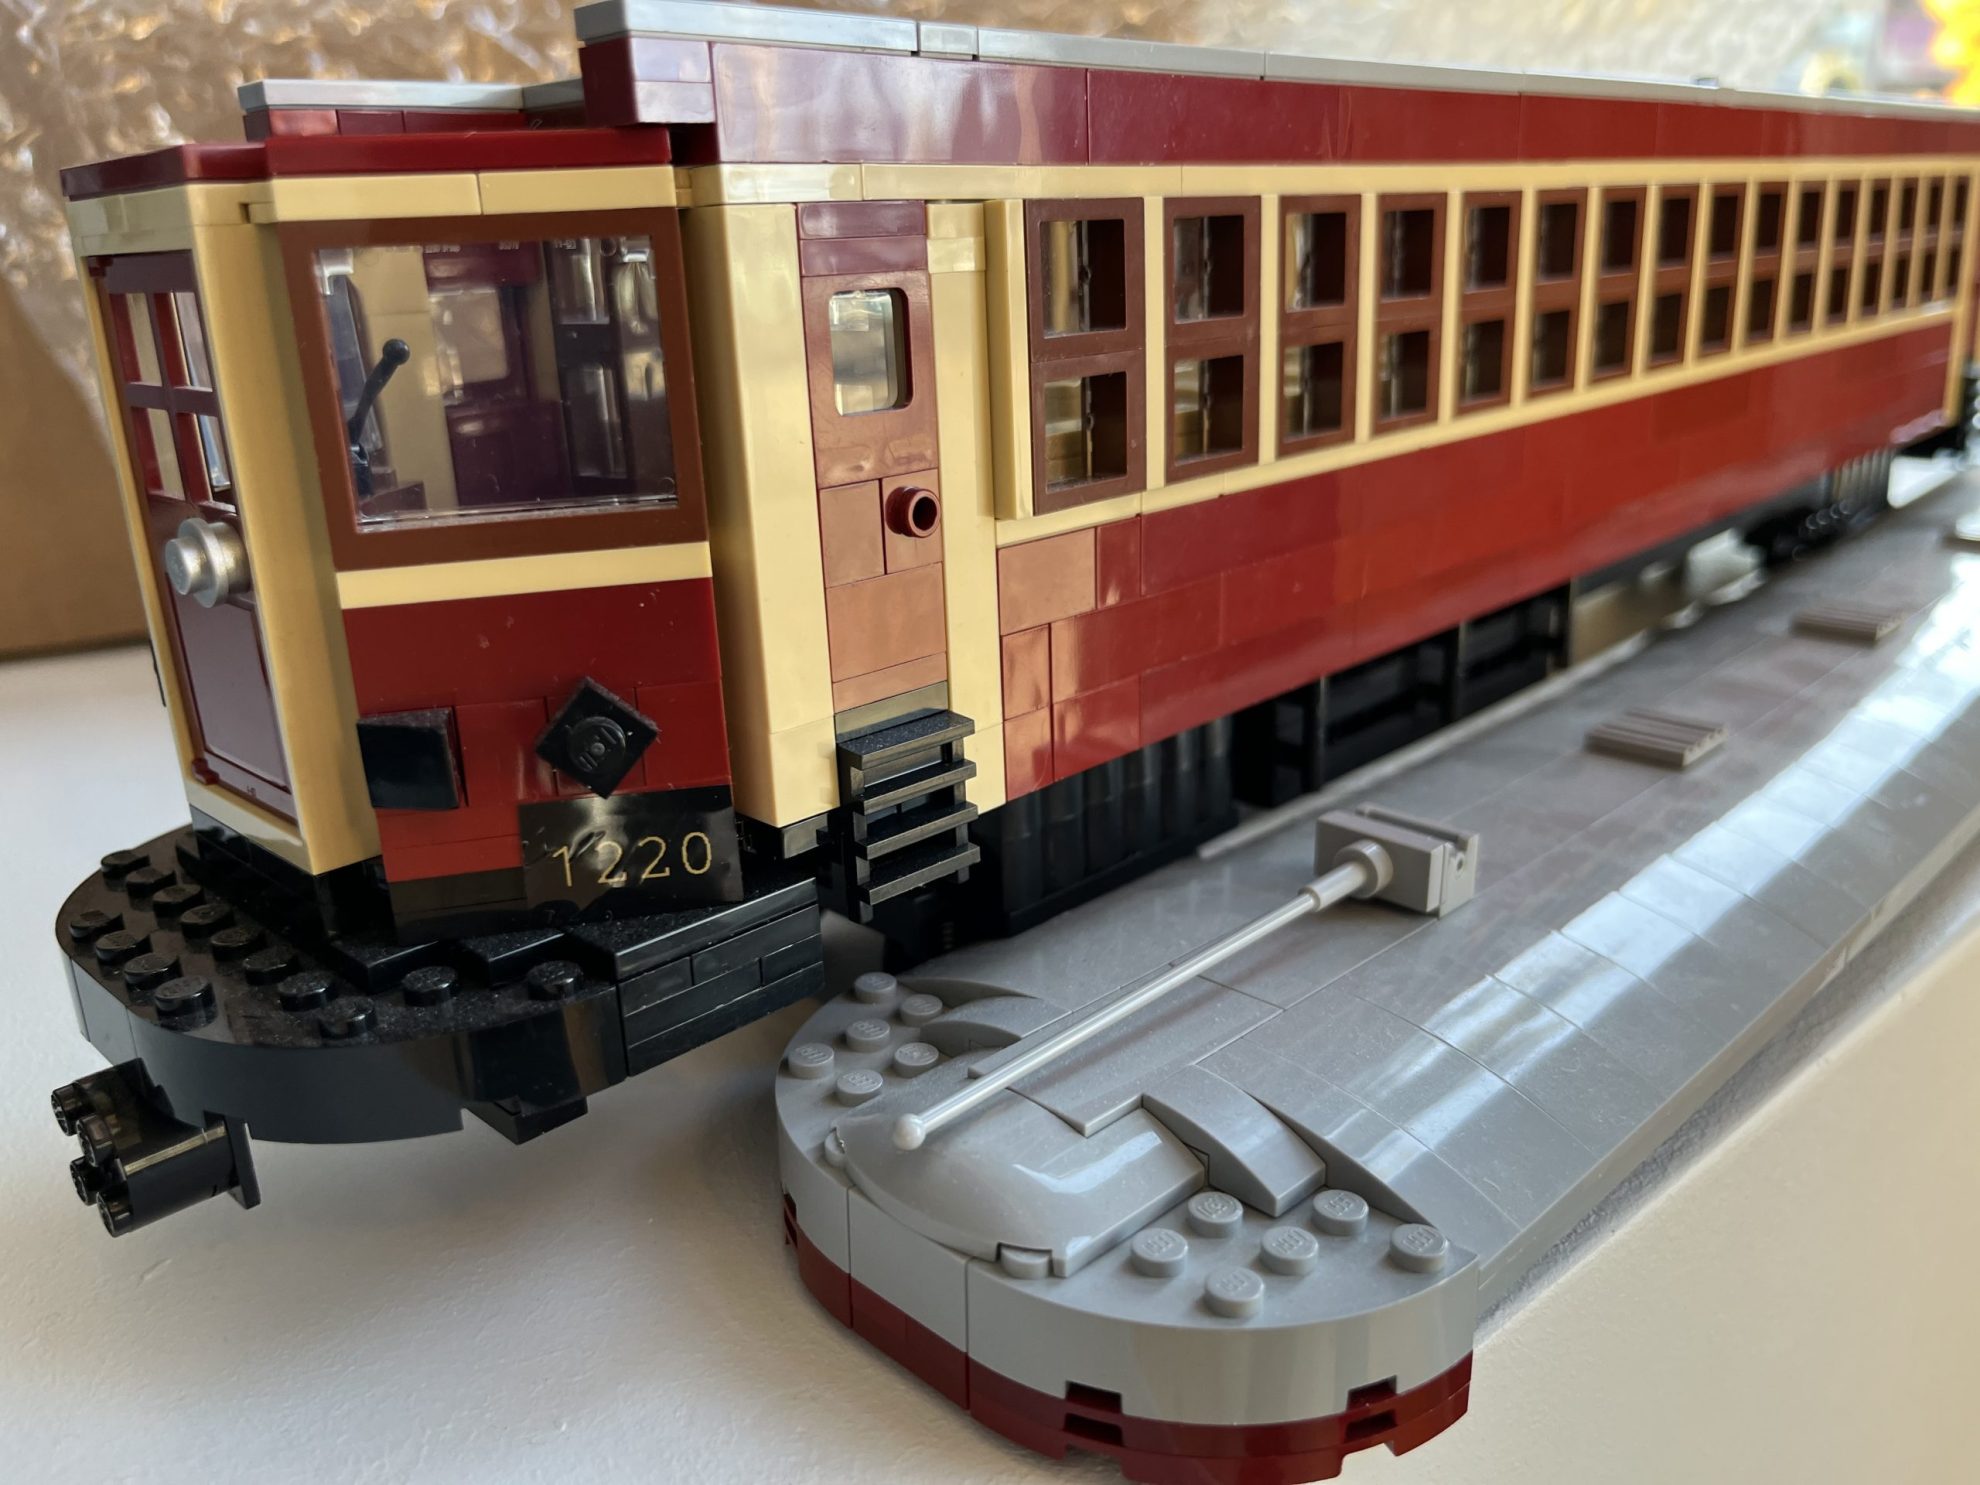 Closeup of Steveston Tram made of LEGO with roof removed placed beside it.